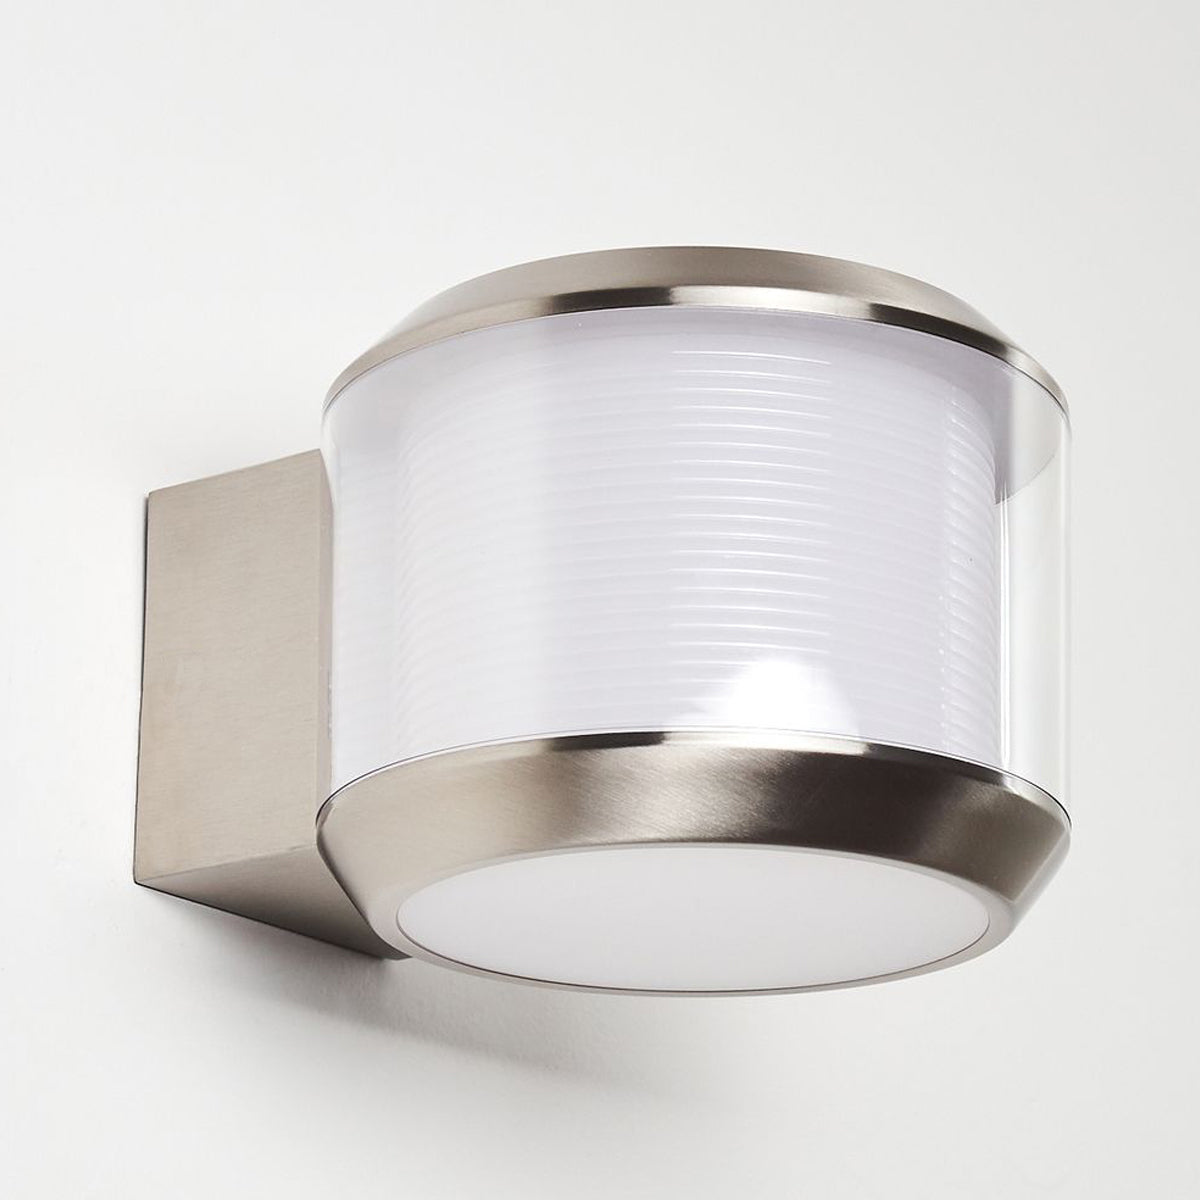 ﻿Our Kai stainless steel cylindrical wall light would look perfect in a modern or more traditional home design. Outside wall lights can provide atmospheric light in your garden, at the front door or on the terrace as well as a great security solution. It is designed for durability and longevity with its robust material producing a fully weatherproof and water resistant light fitting. Use LED bulbs to make this light energy efficient and low cost to run